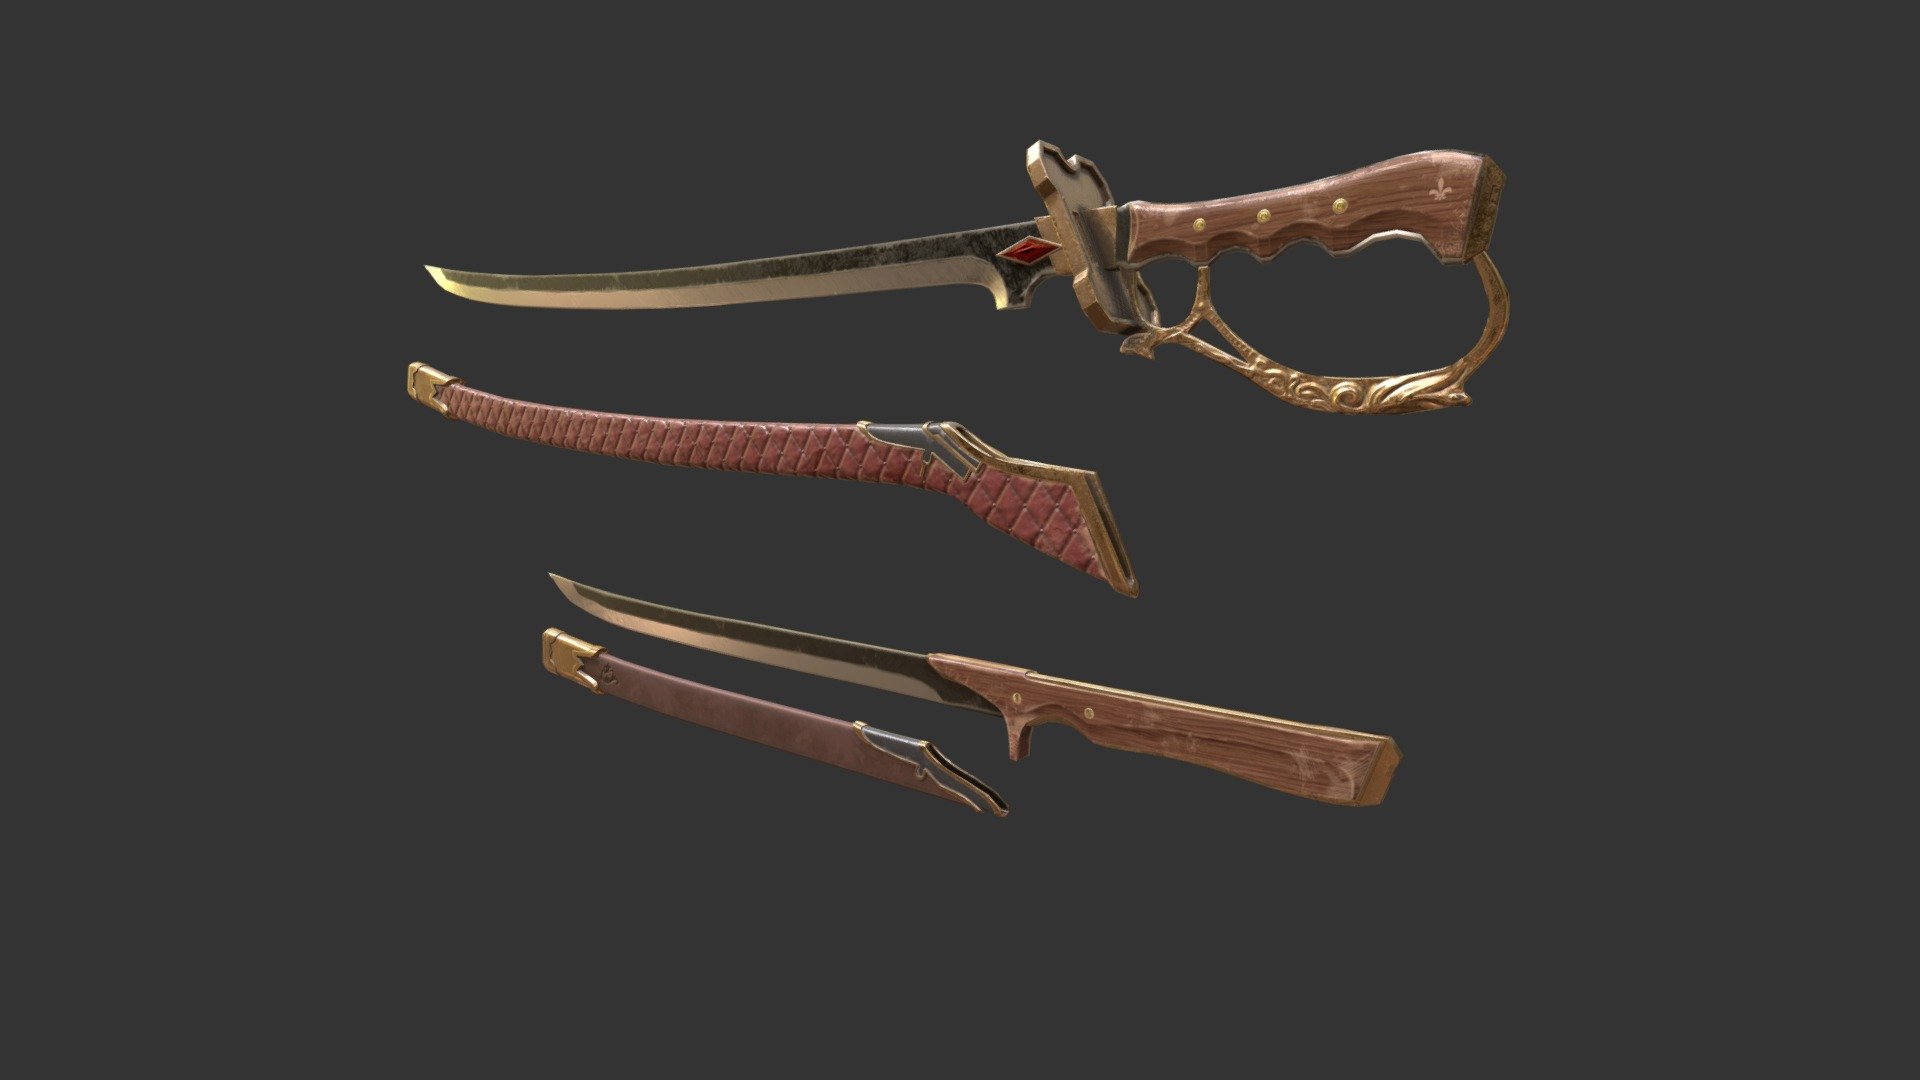 3D Modeling by me.

The original concept  by  https://redw0lf777sg.deviantart.com

 - Cyrella's Katana-style Saber and Short Sword - 3D model by colomaryud 3d model